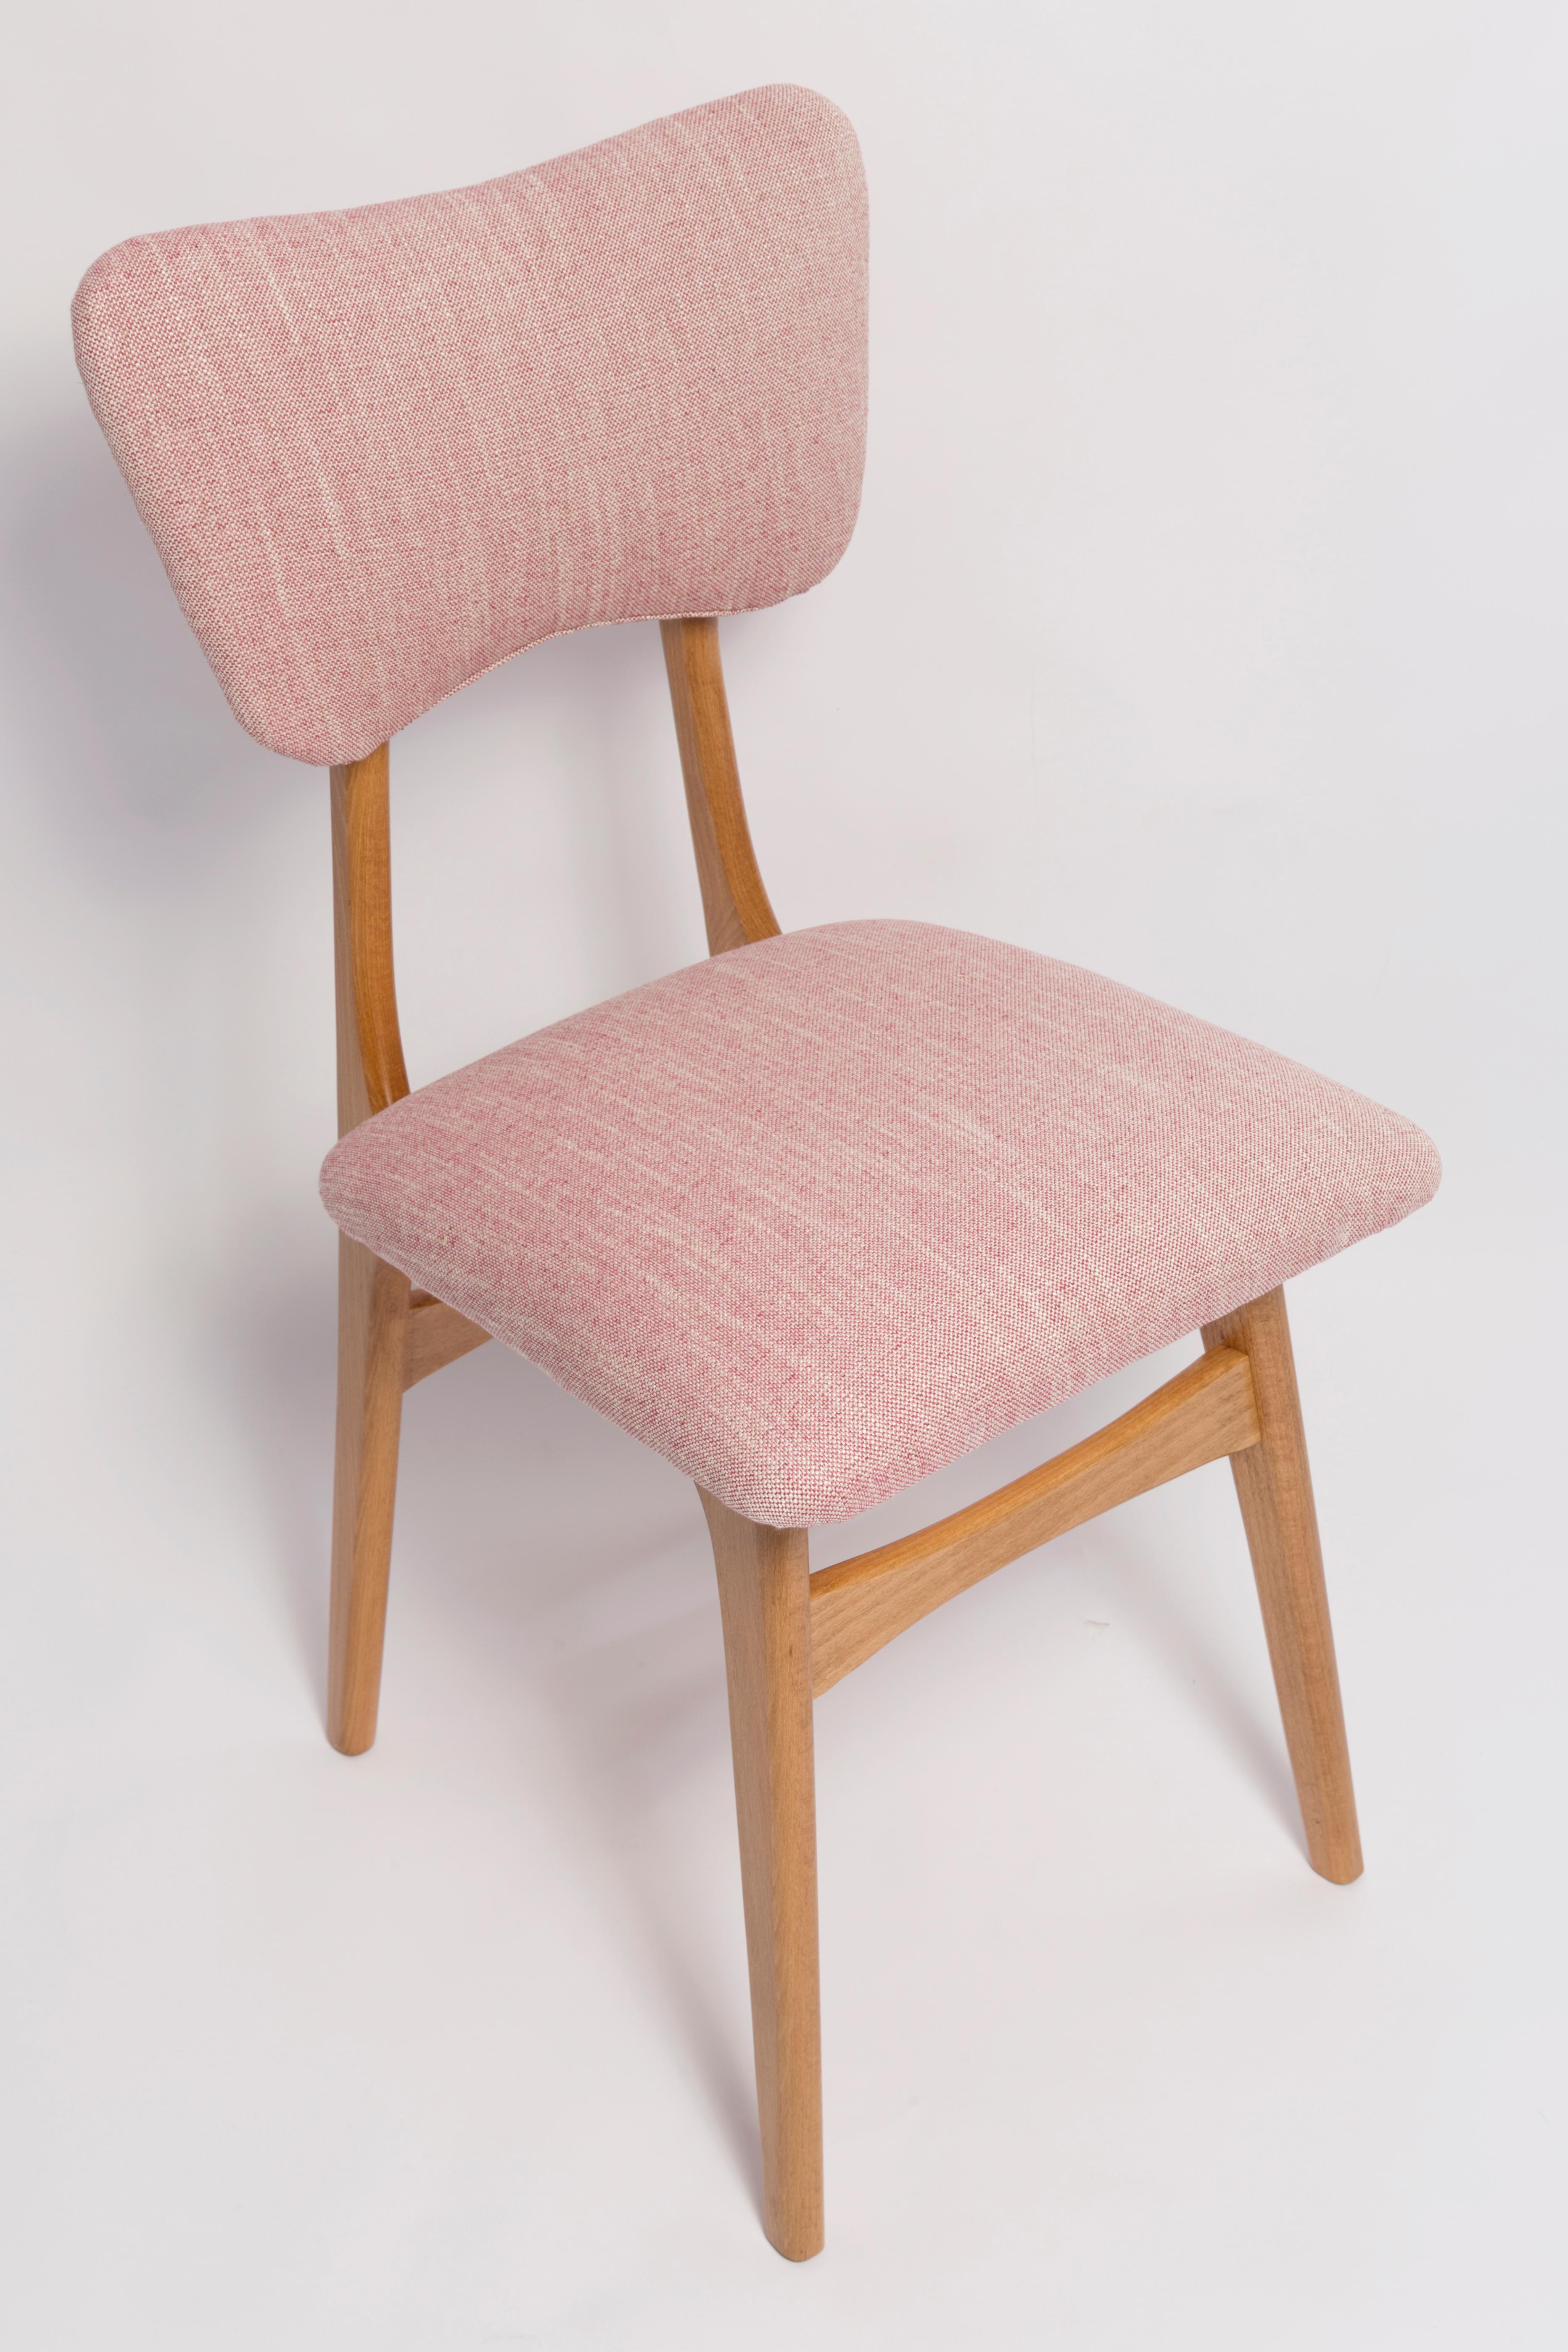 Polish Mid Century Butterfly Dining Chair, Pink Linen, Light Wood, Europe, 1960s For Sale